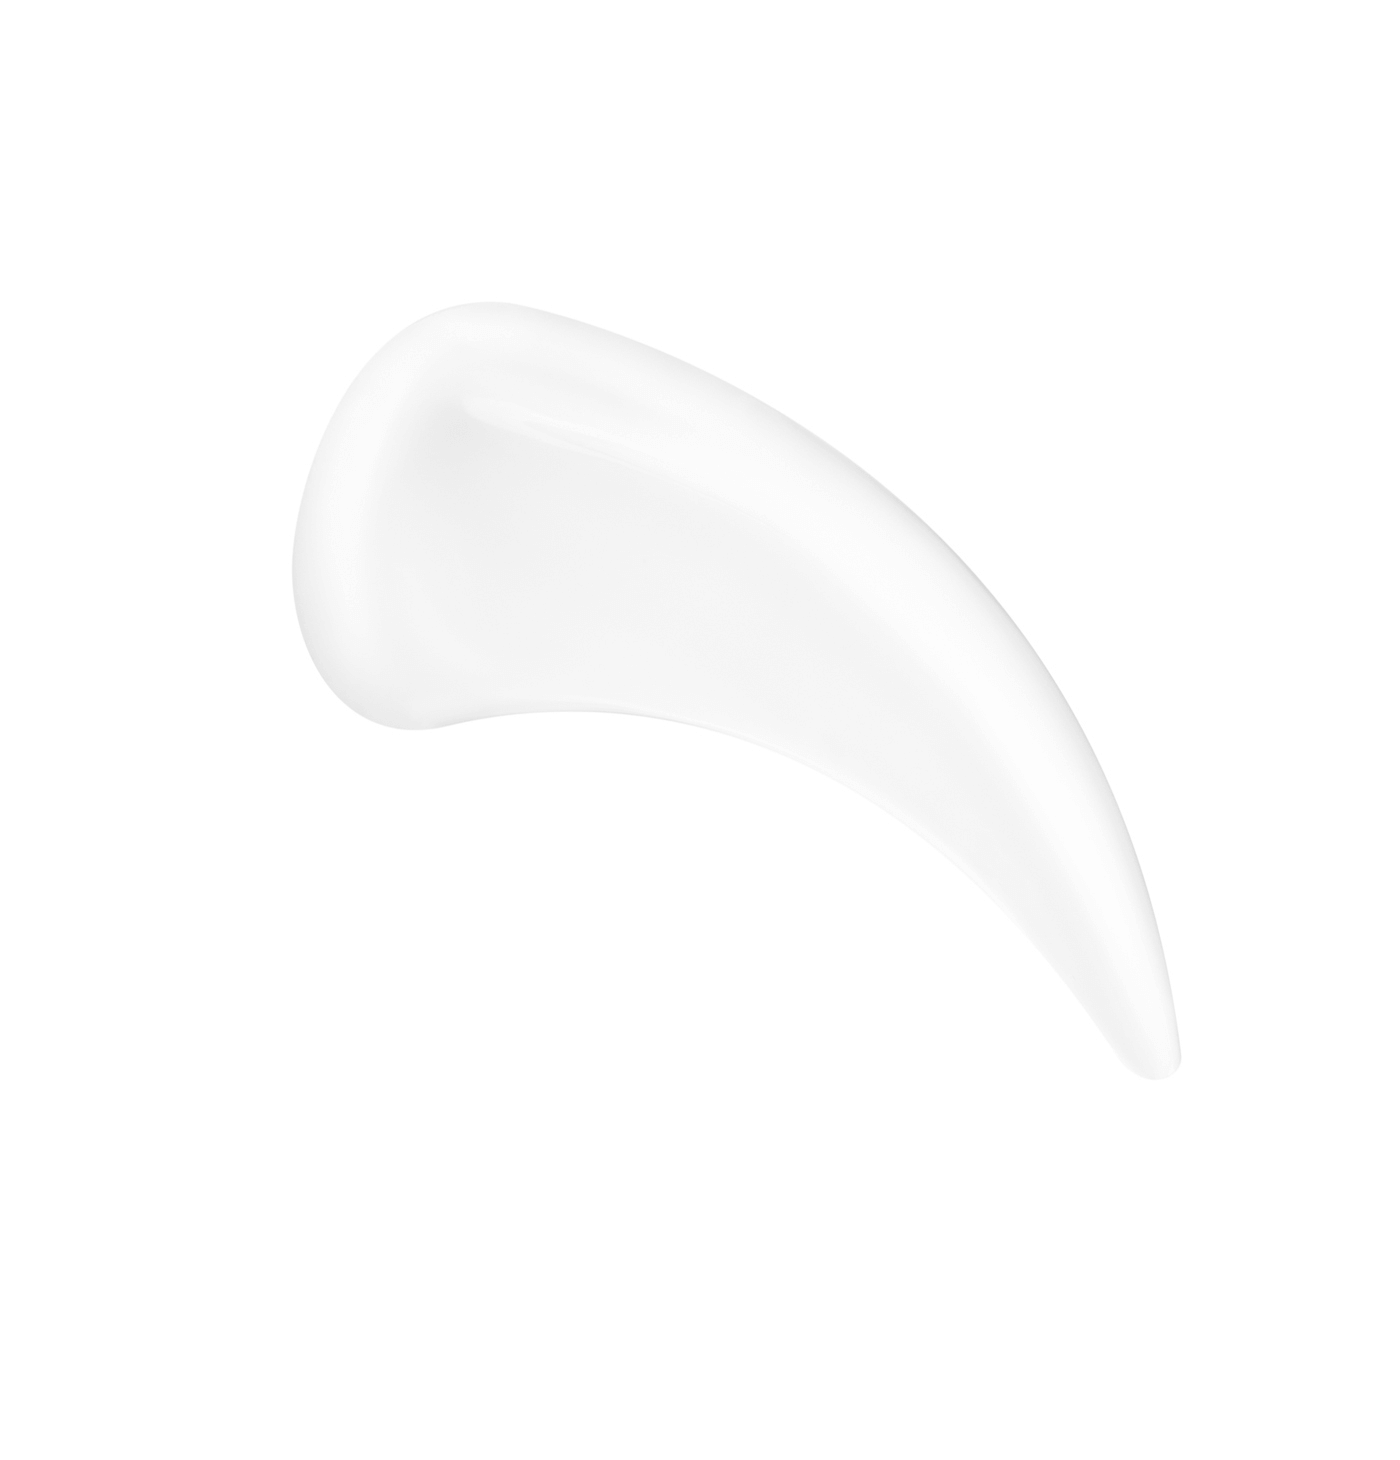 Peel-off Face Mask